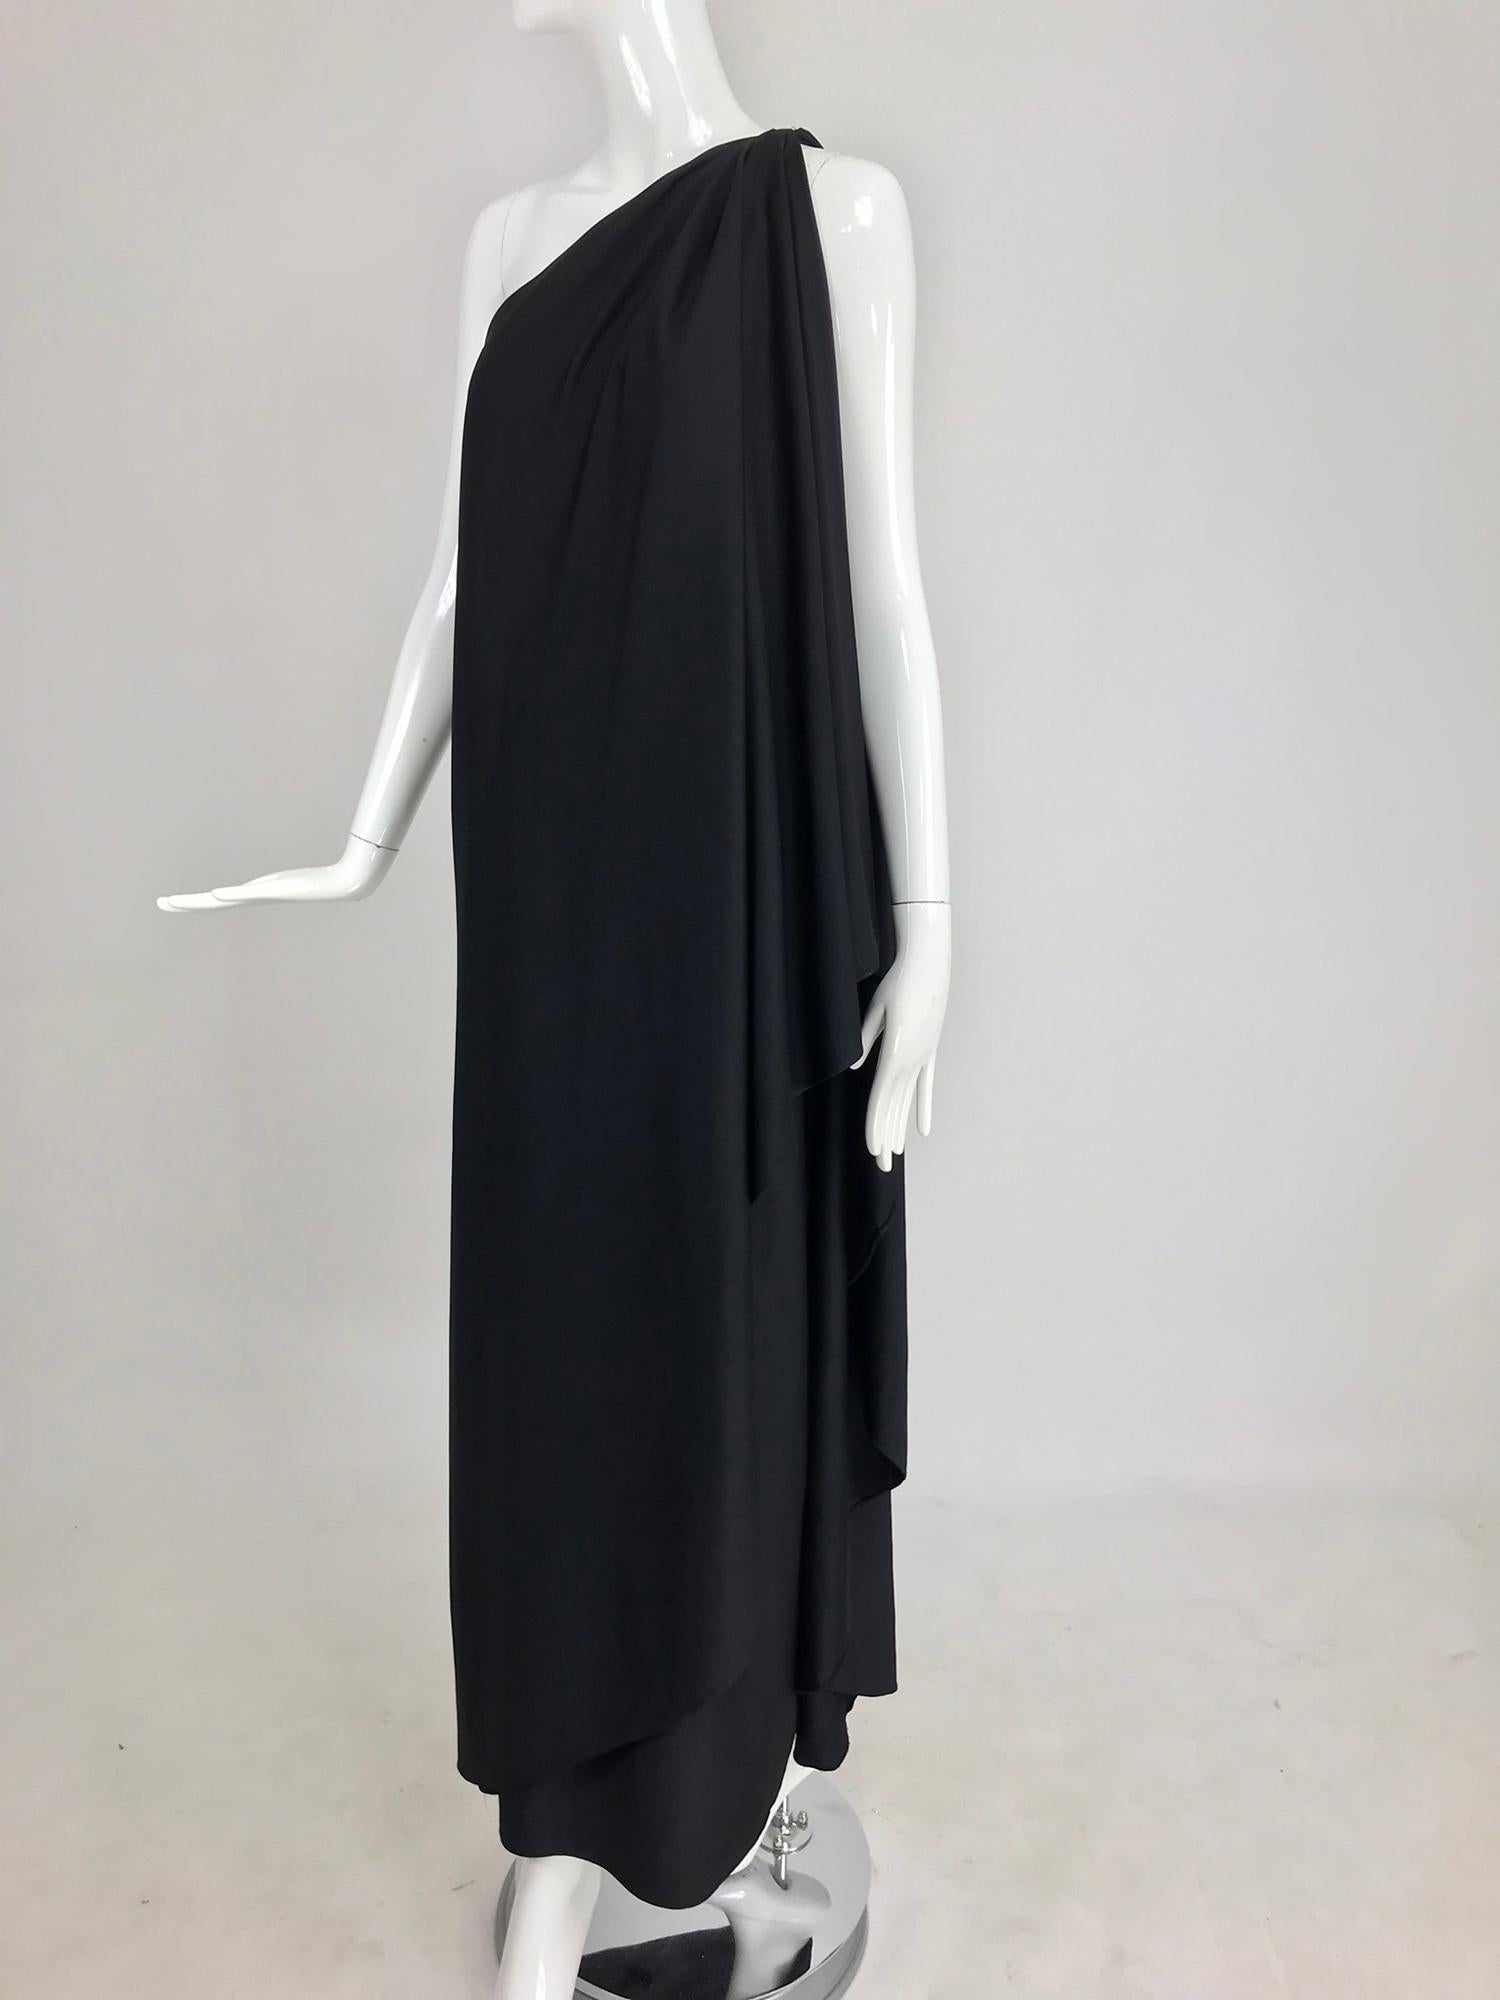 Halston IV one shoulder black jersey draped maxi dress from the 1980s. Goddess style gown closes at the draped shoulder with a hidden hook and eye, the gown wraps and drapes and is open at the side front. Side hem vent. Black poly jersey fabric